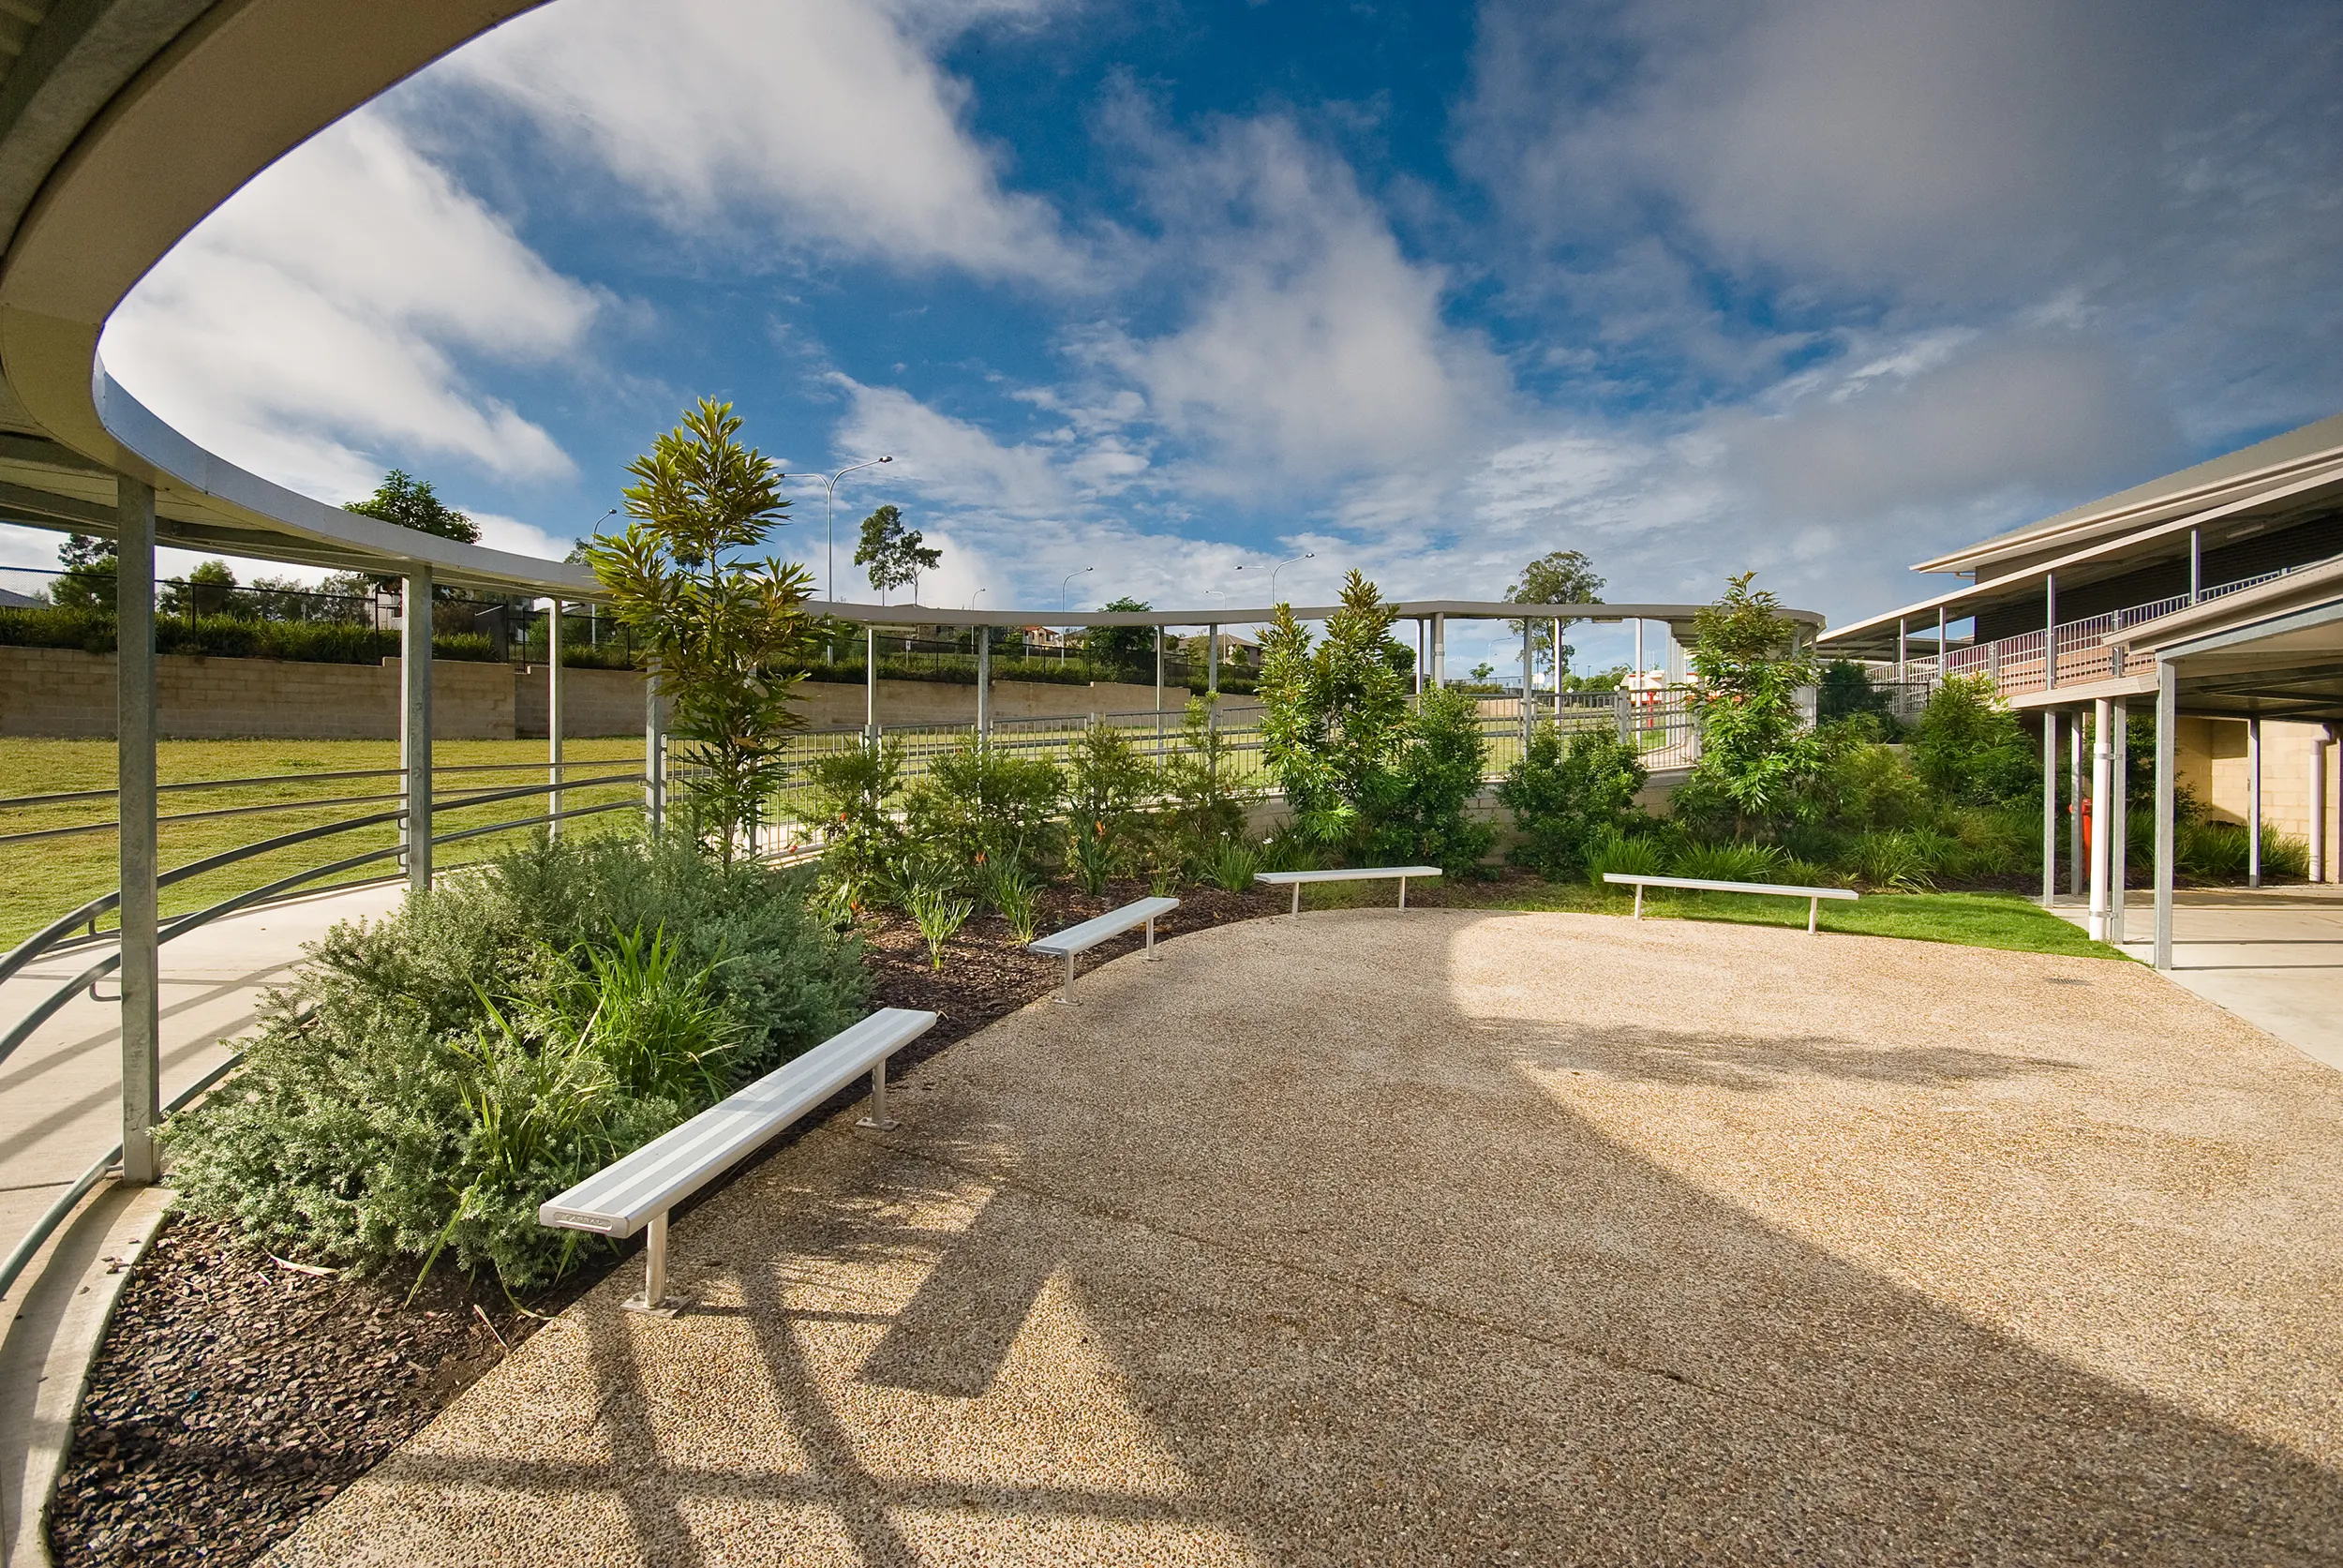 Seating area in a school designed by landscape architects